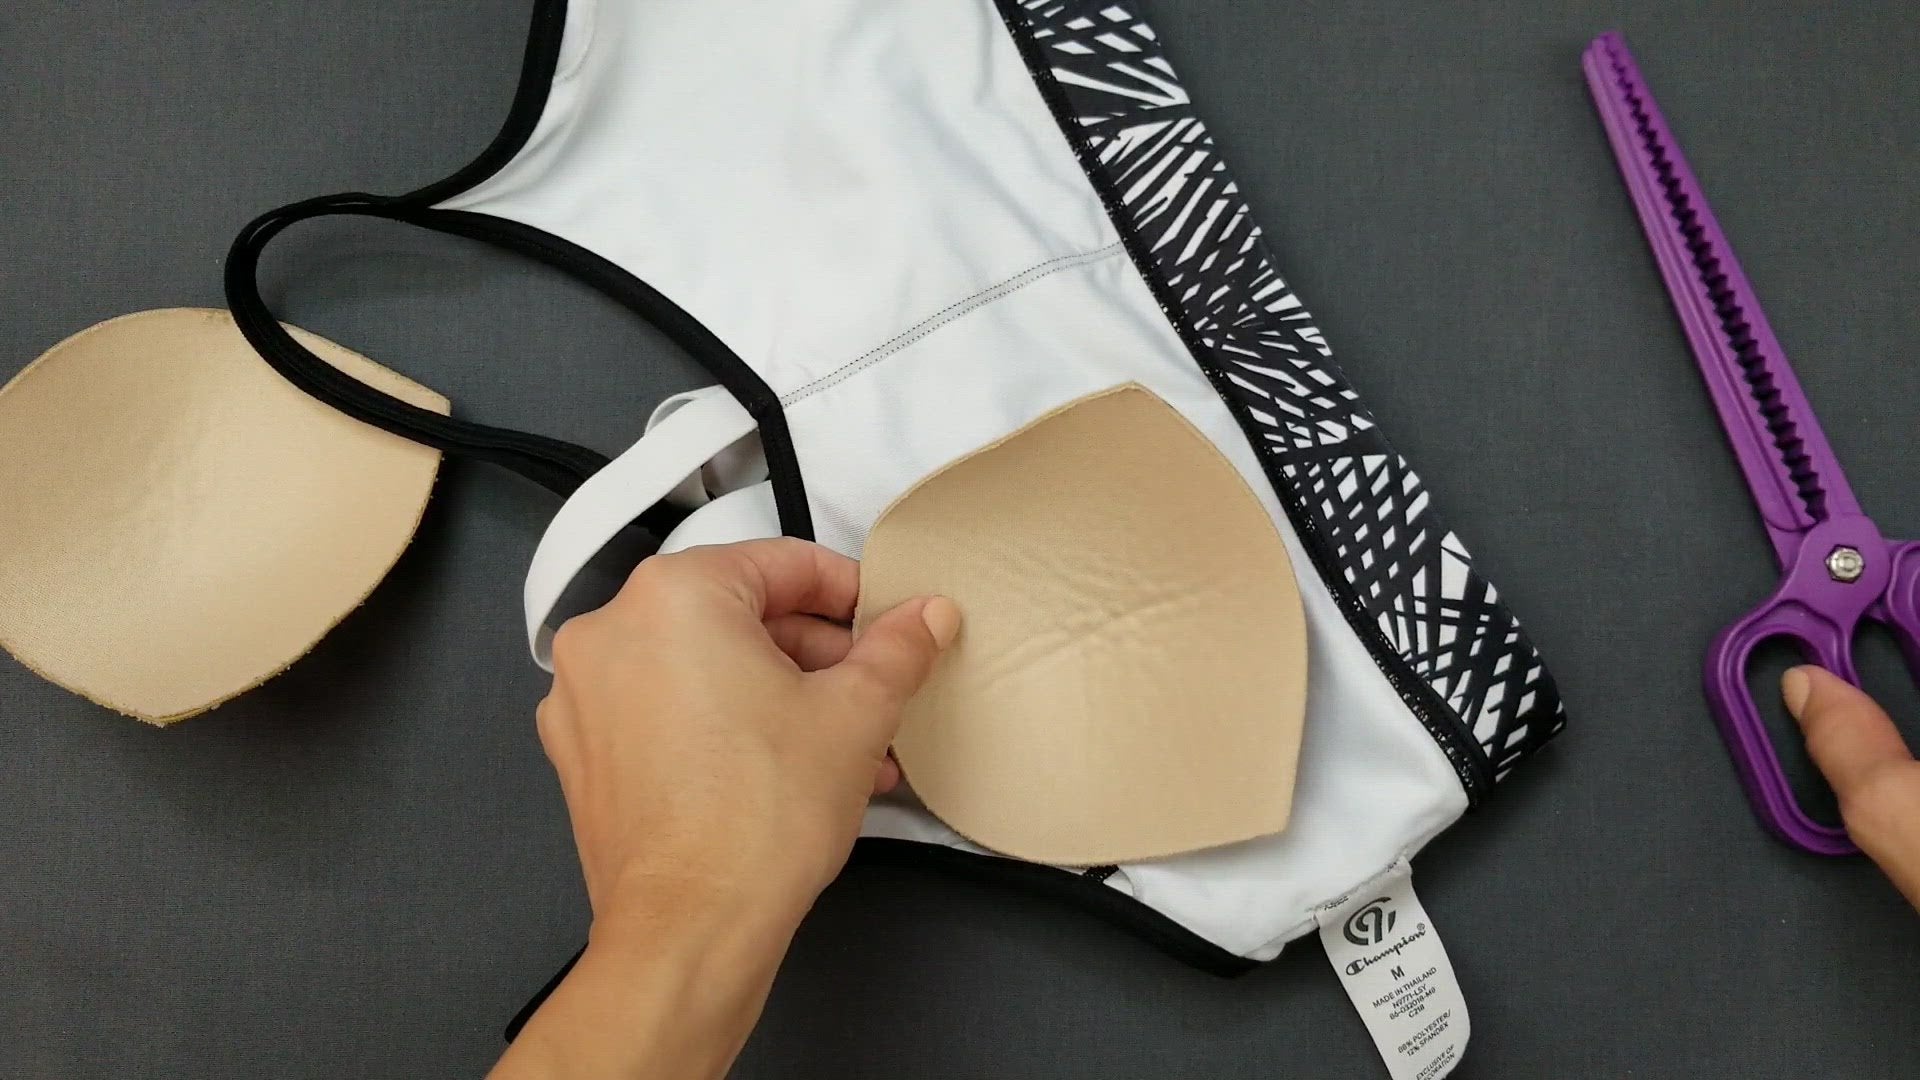 Showing an easy way to insert a removable padding back in a sports bra